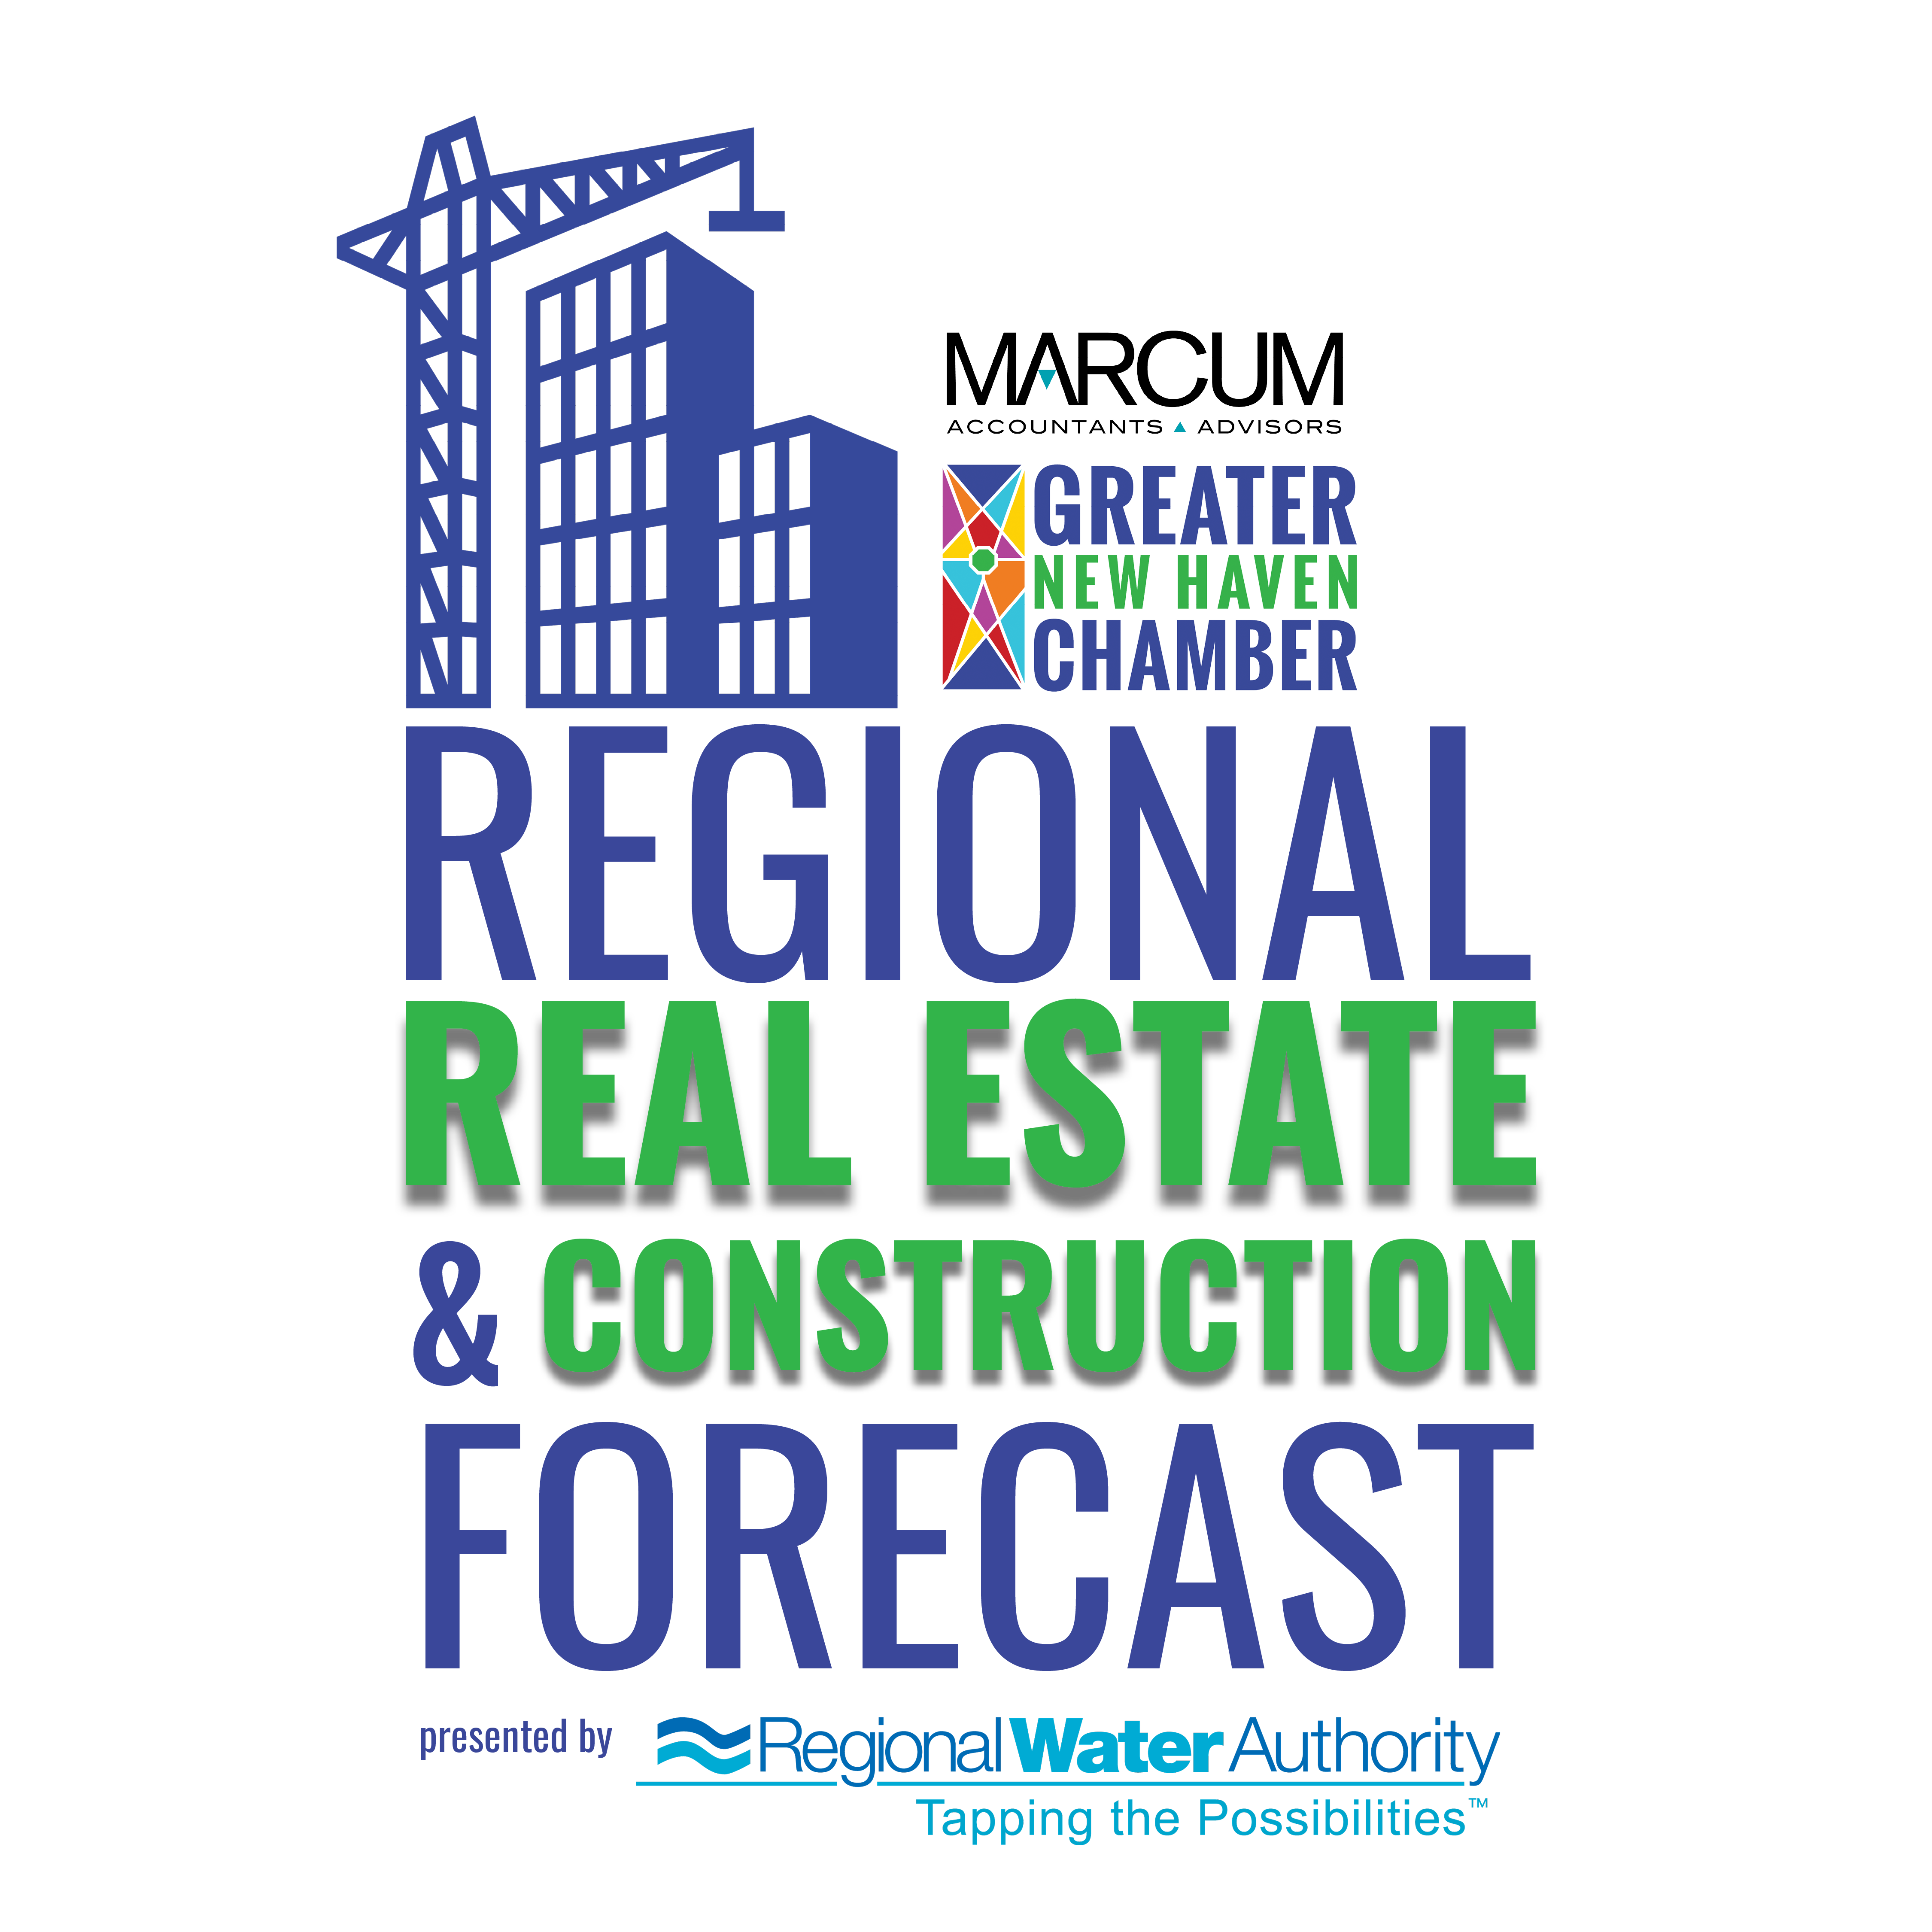 Image for Regional Real Estate & Construction Forecast: DECD Commissioner David Lehman and Developers of Olive + Wooster, Elm City Bioscience Center, and Jaigantic Studios to Provide Updates